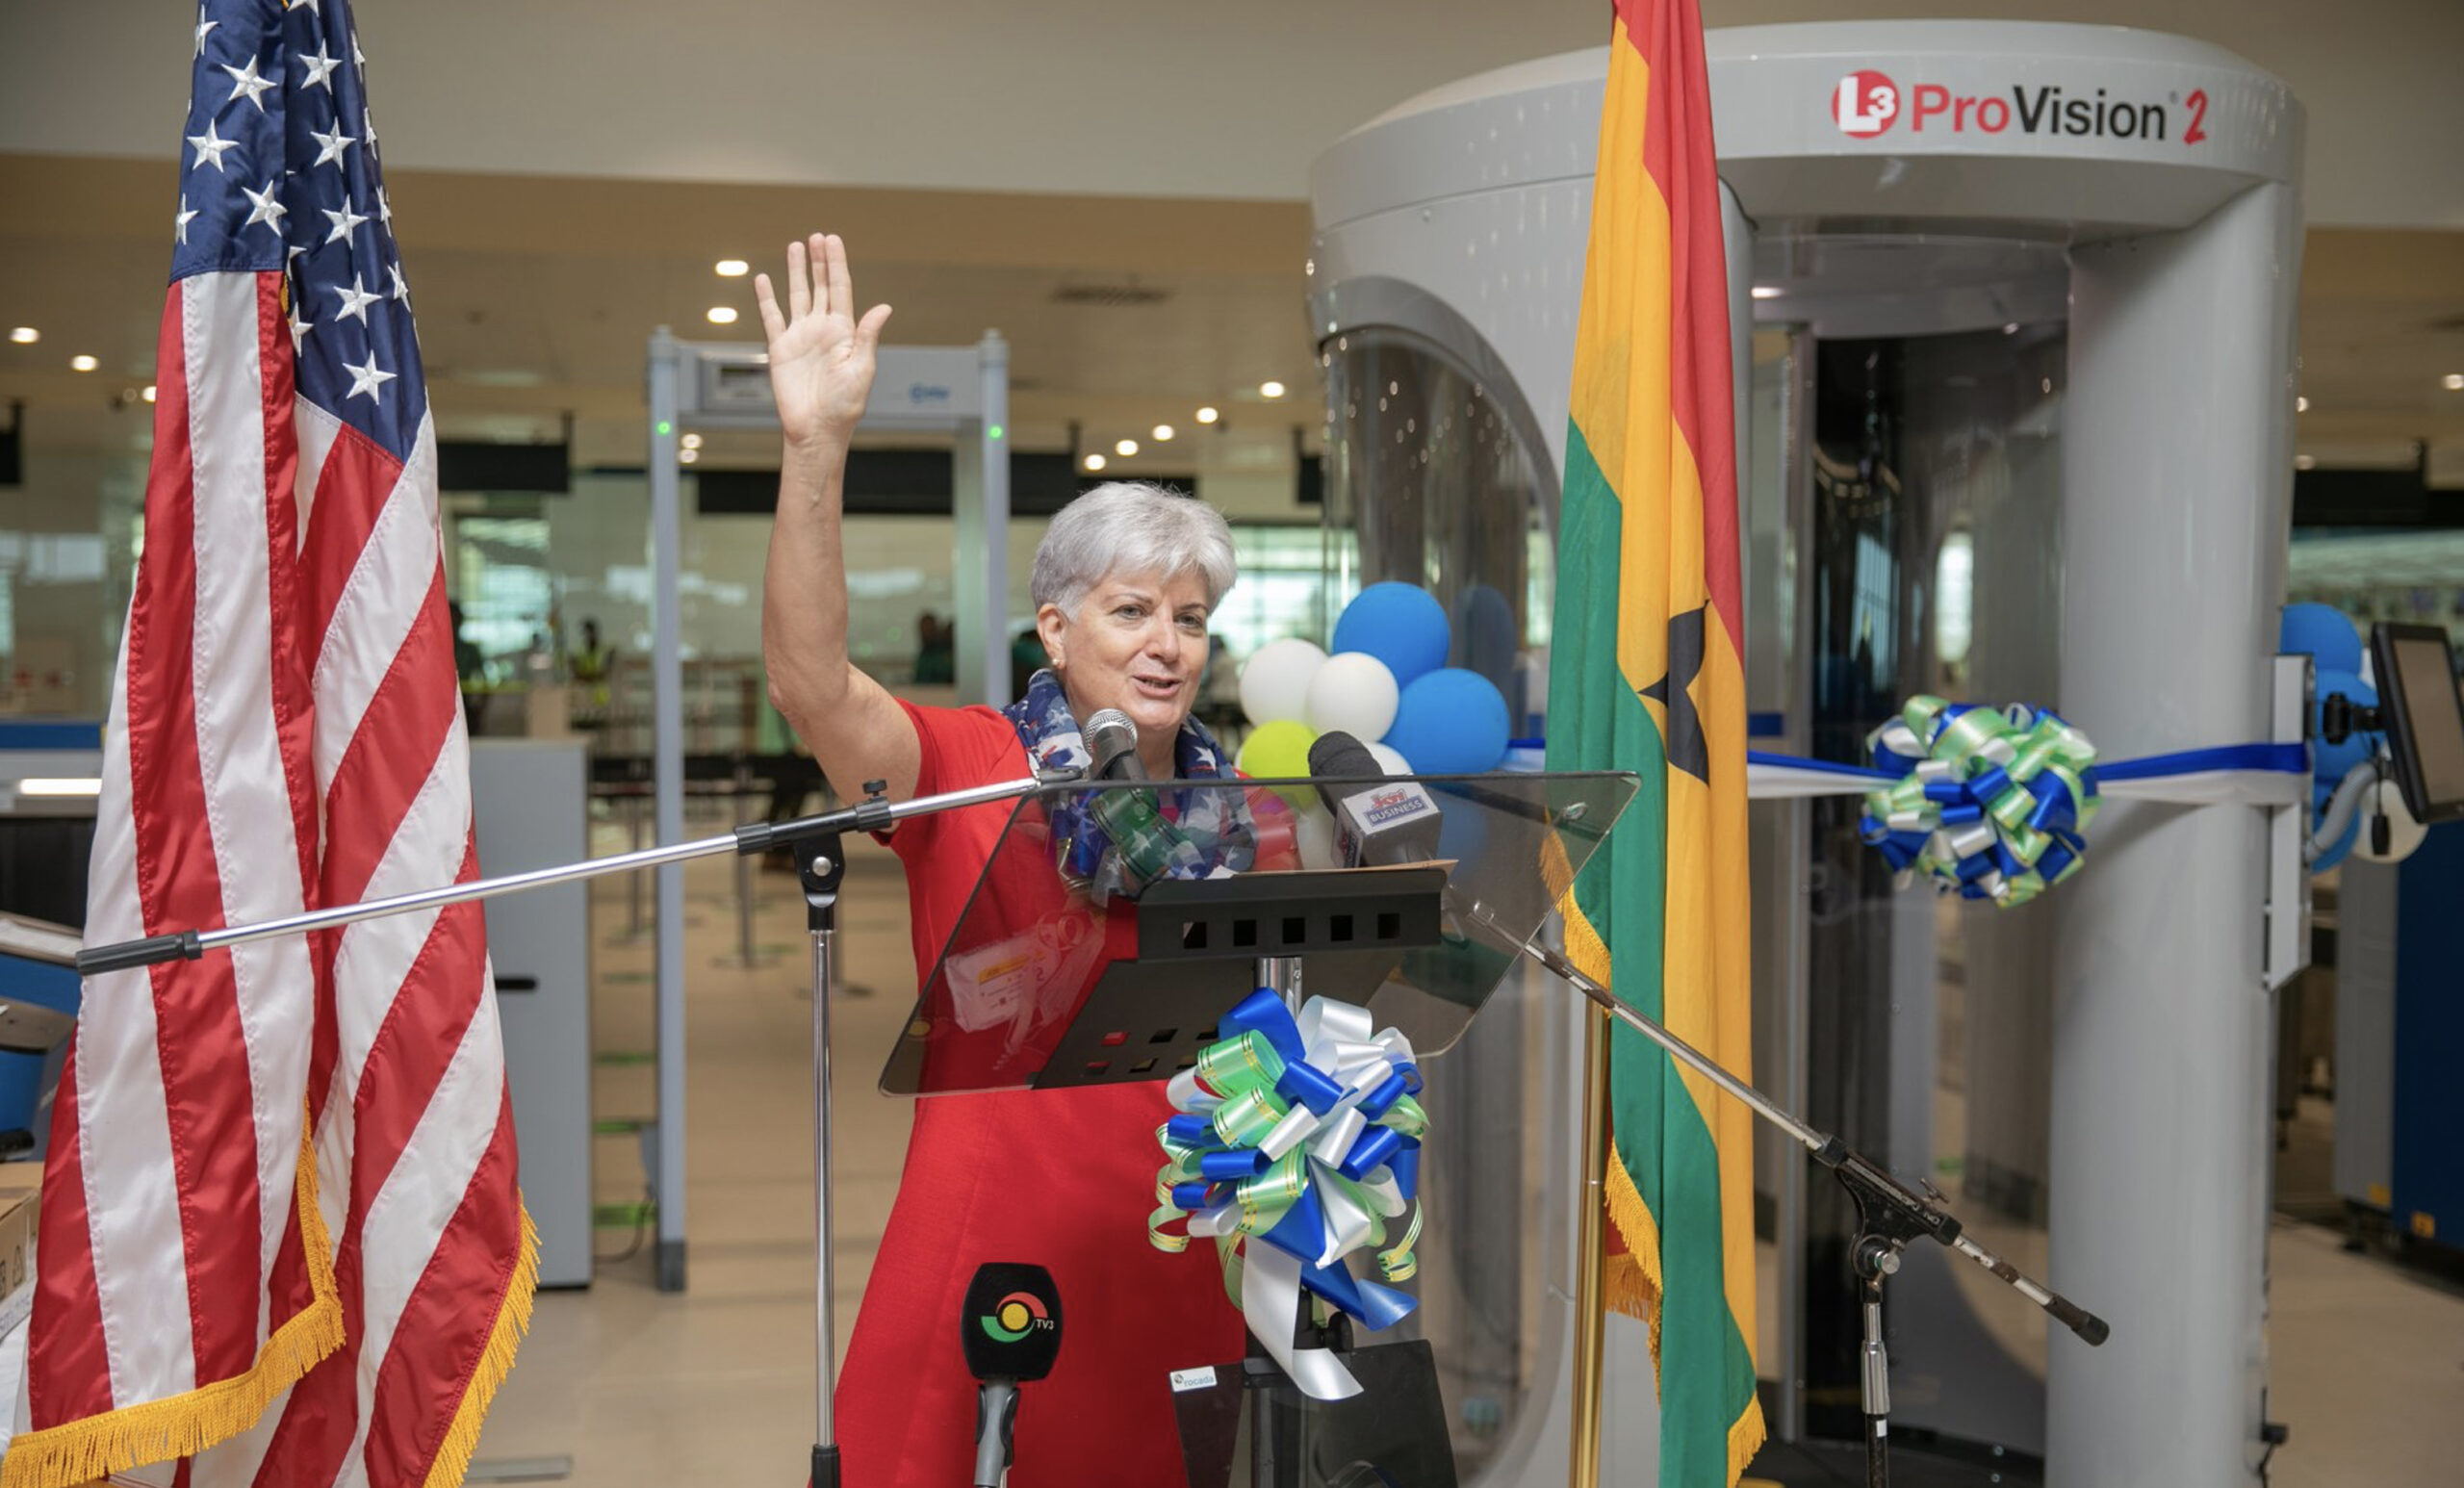 U.S. Ambassador Stephanie S. Sullivan presents new aviation security screening equipment to the government of Ghana on March 23, 2021. The equipment was donated as part of an ATA equipment grant. (U.S. Department of State photo)